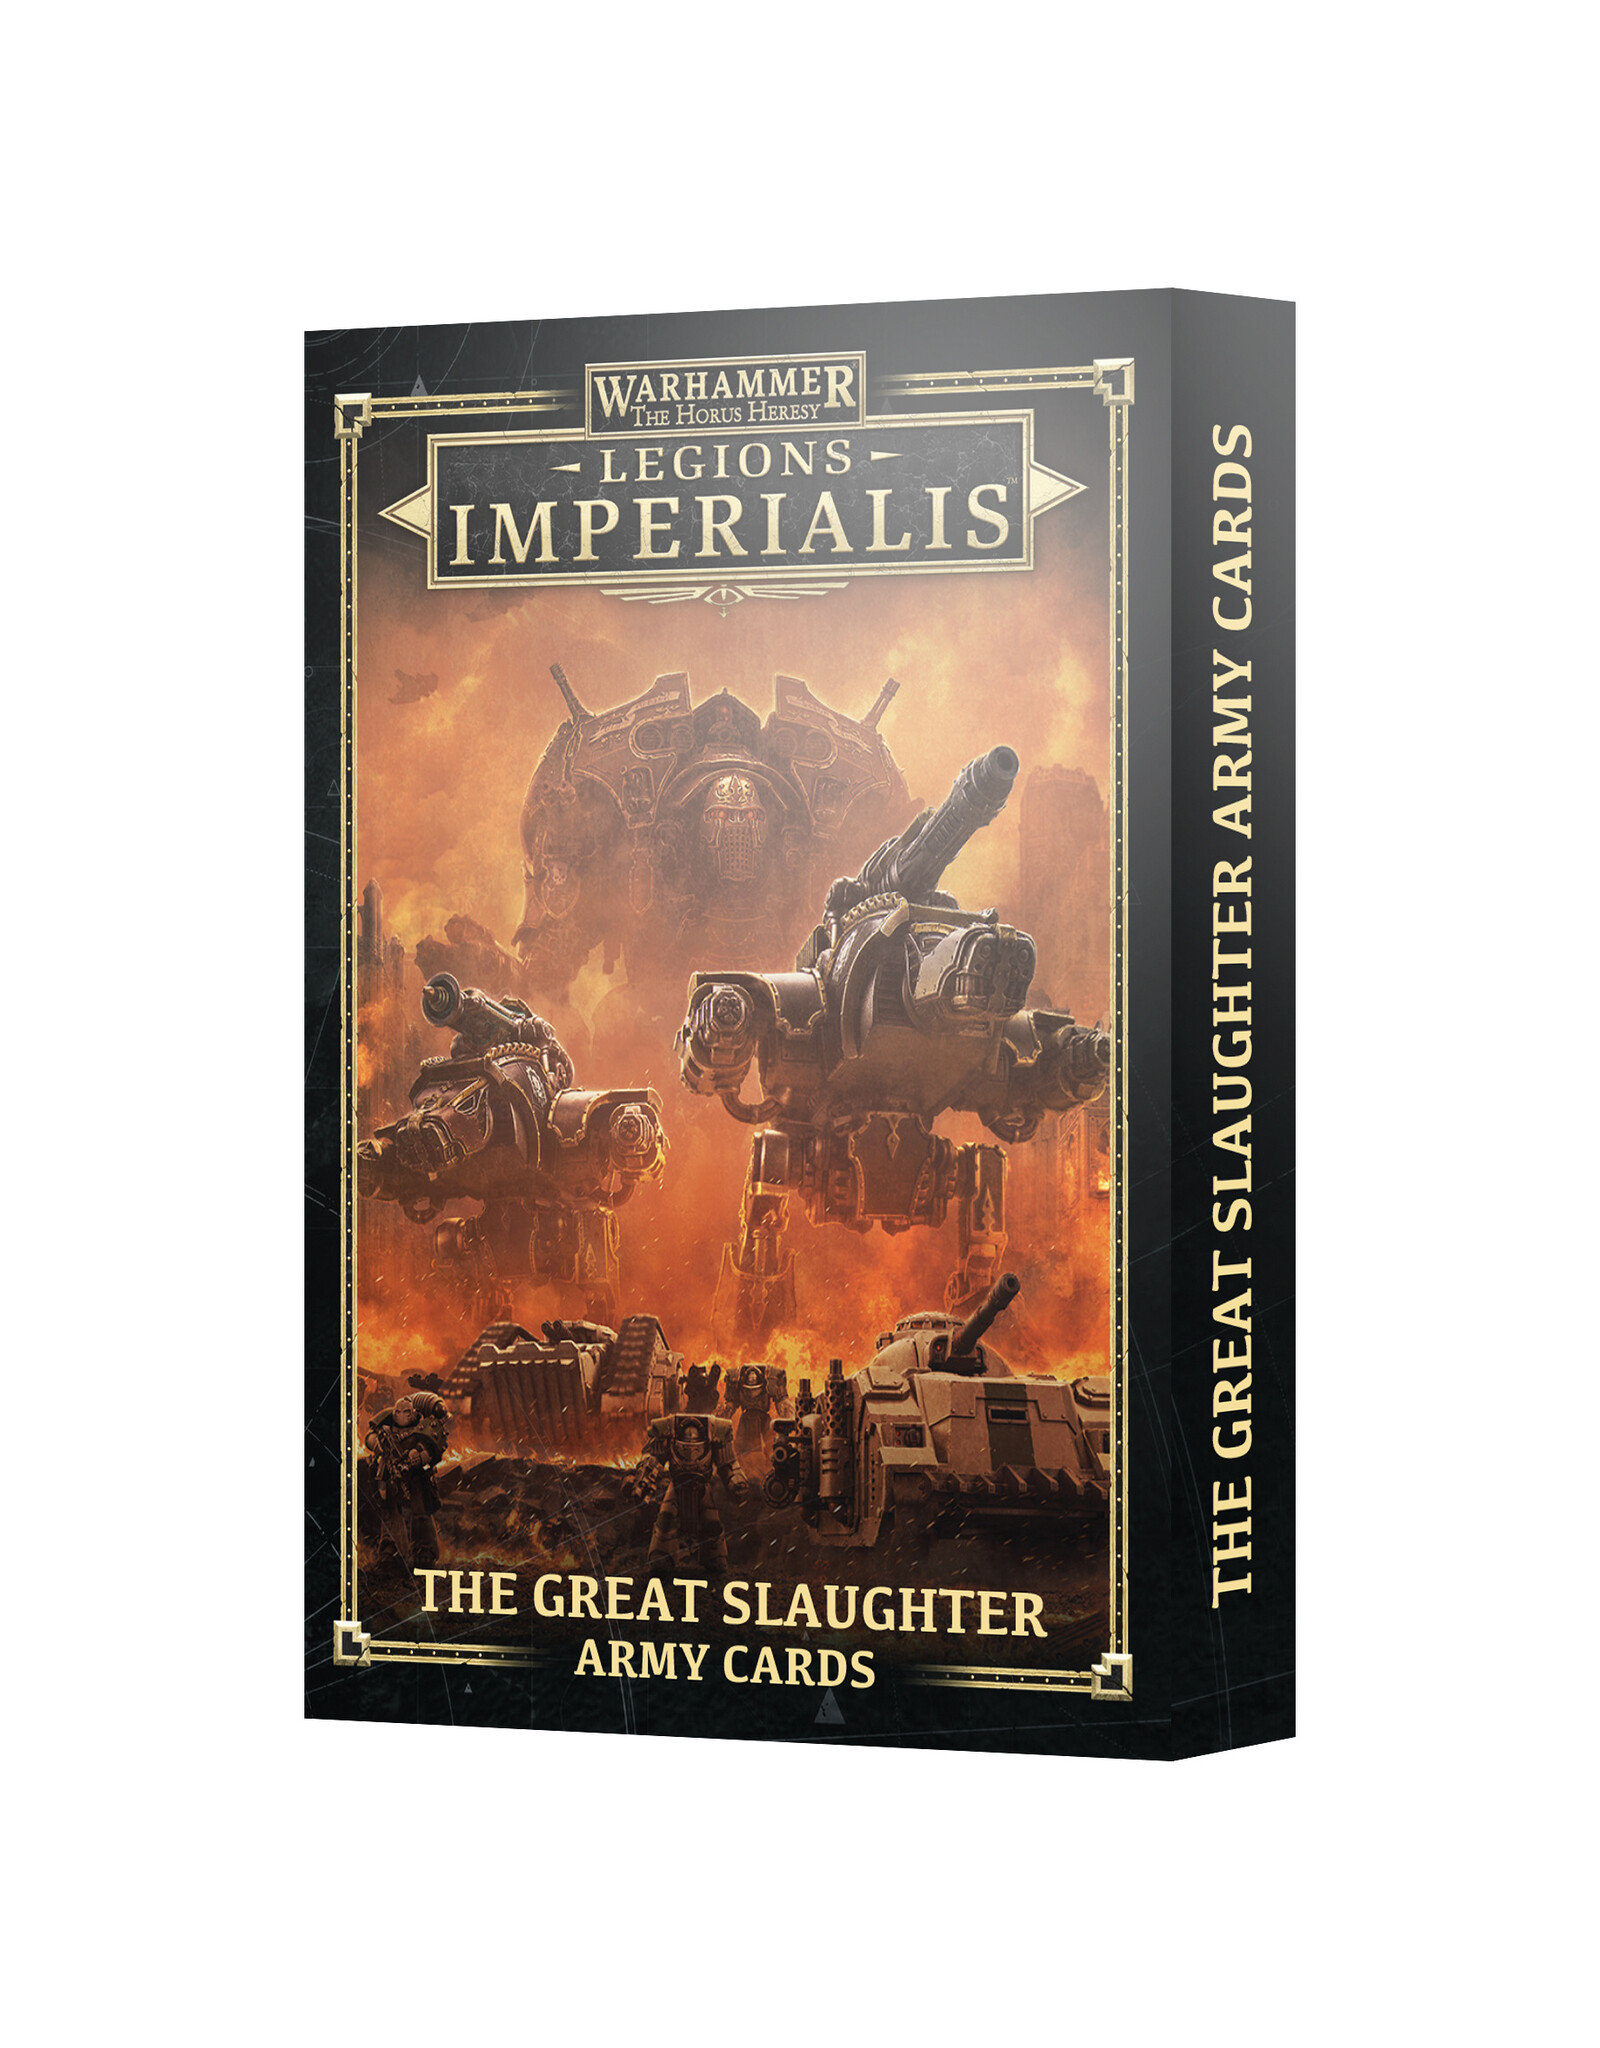 Legion Imperialis Legions Imperialis: The Great Slaughter Army Cards